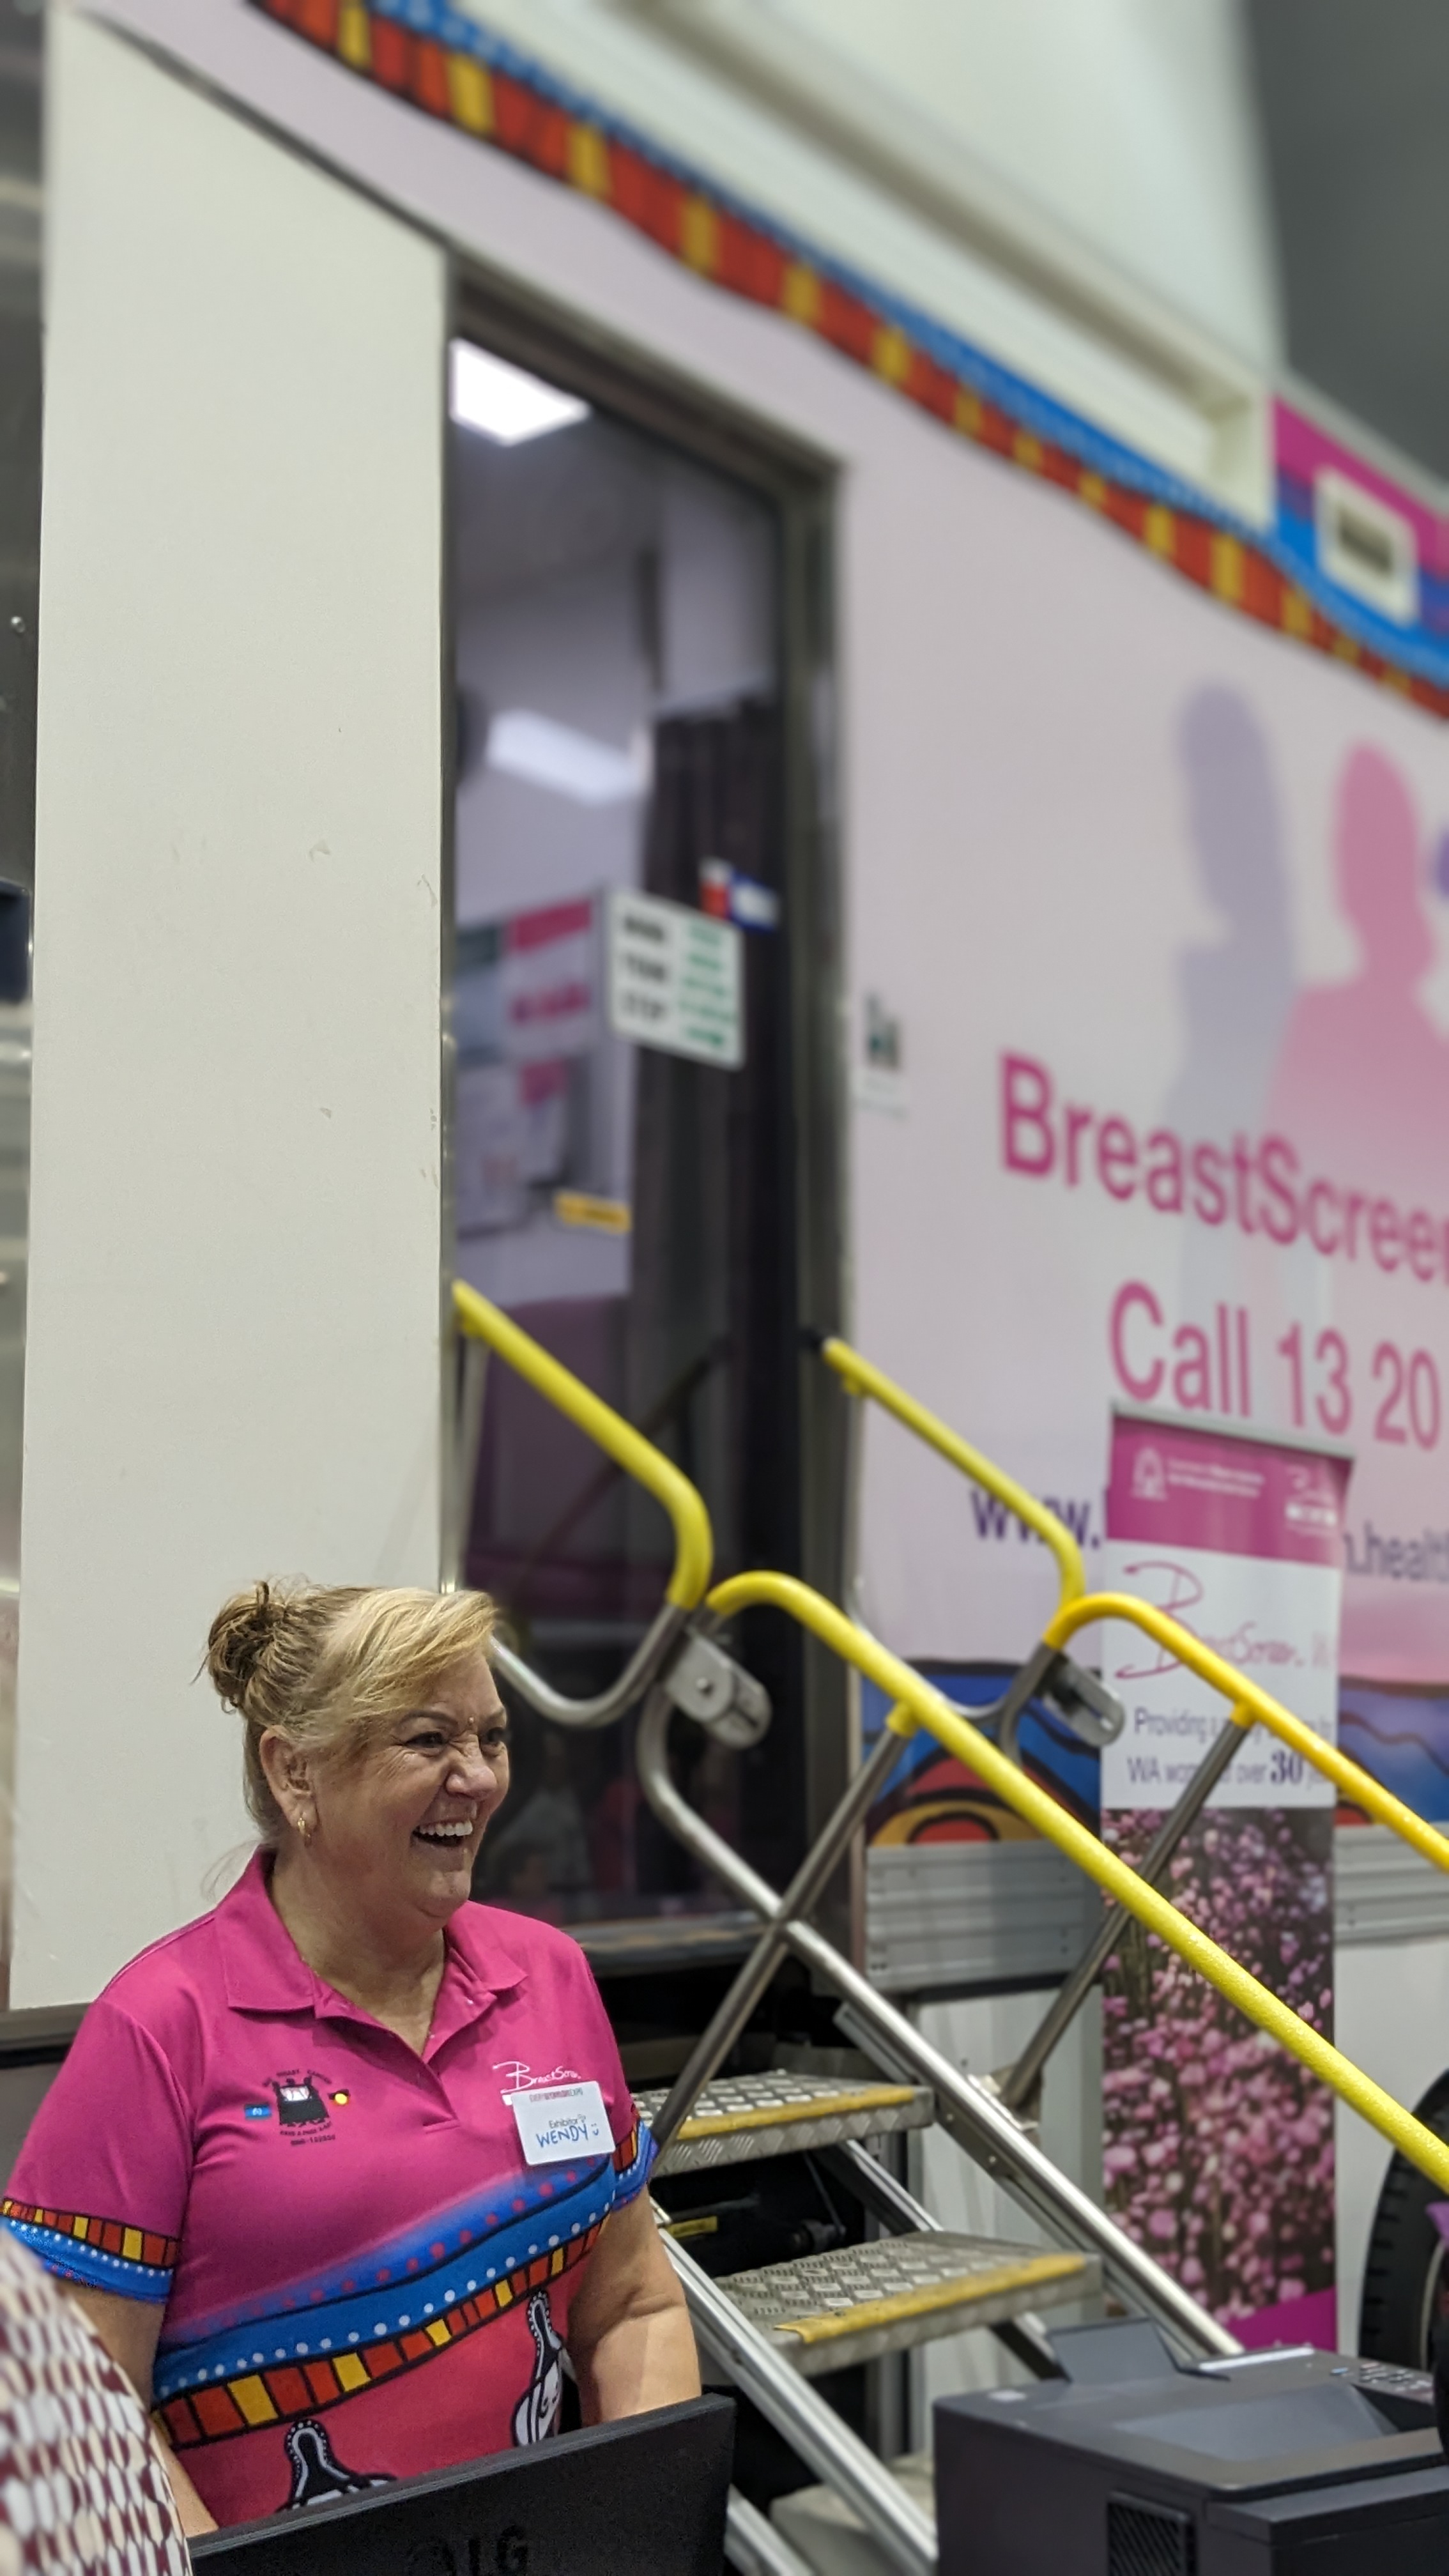 BreastScreen WA staff member smiling at client in front of screening truck